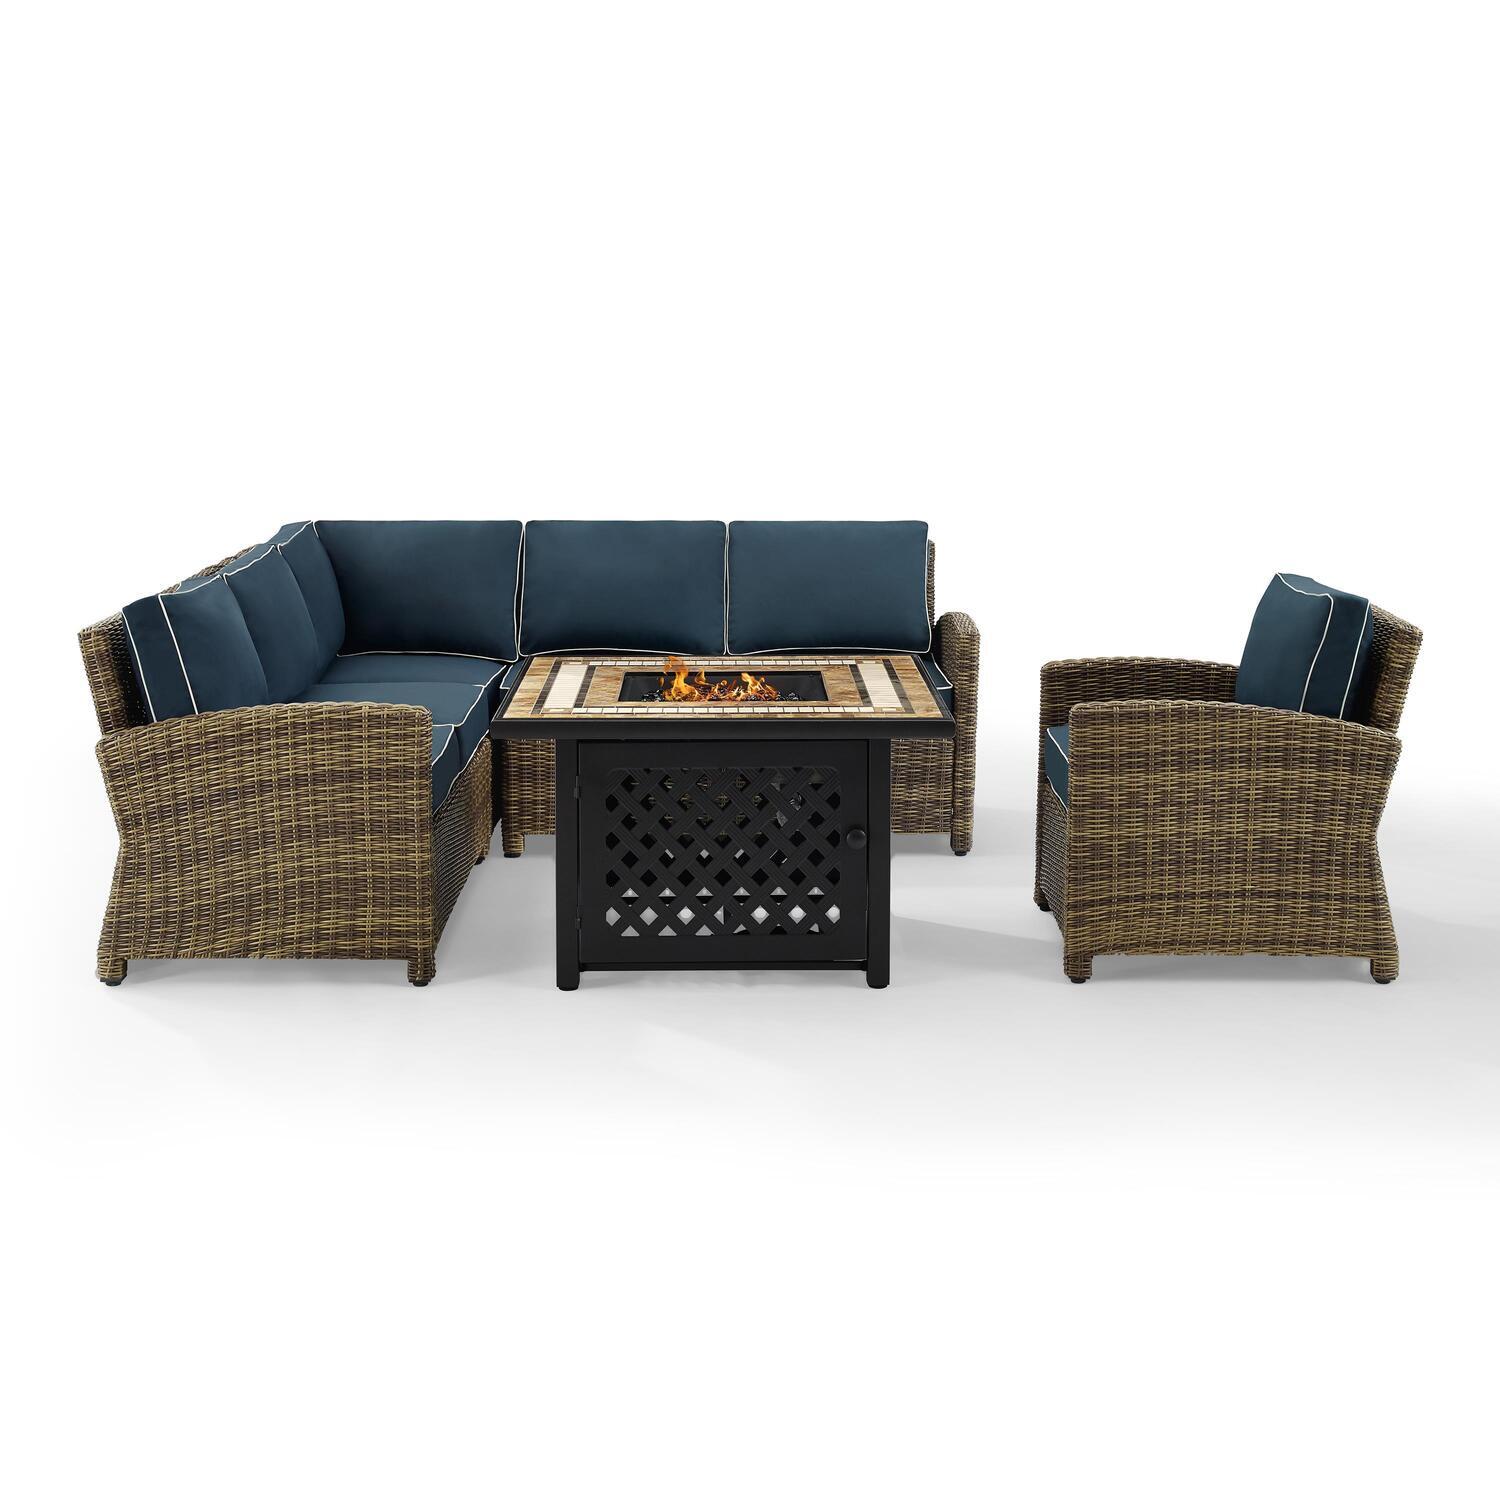 Bradenton 5Pc Outdoor Wicker Sectional Set W/Fire Table Weathered Brown/Navy - Right Corner Loveseat, Left Corner Loveseat, Corner Chair, Armchair, & Tucson Fire Table - image 1 of 9